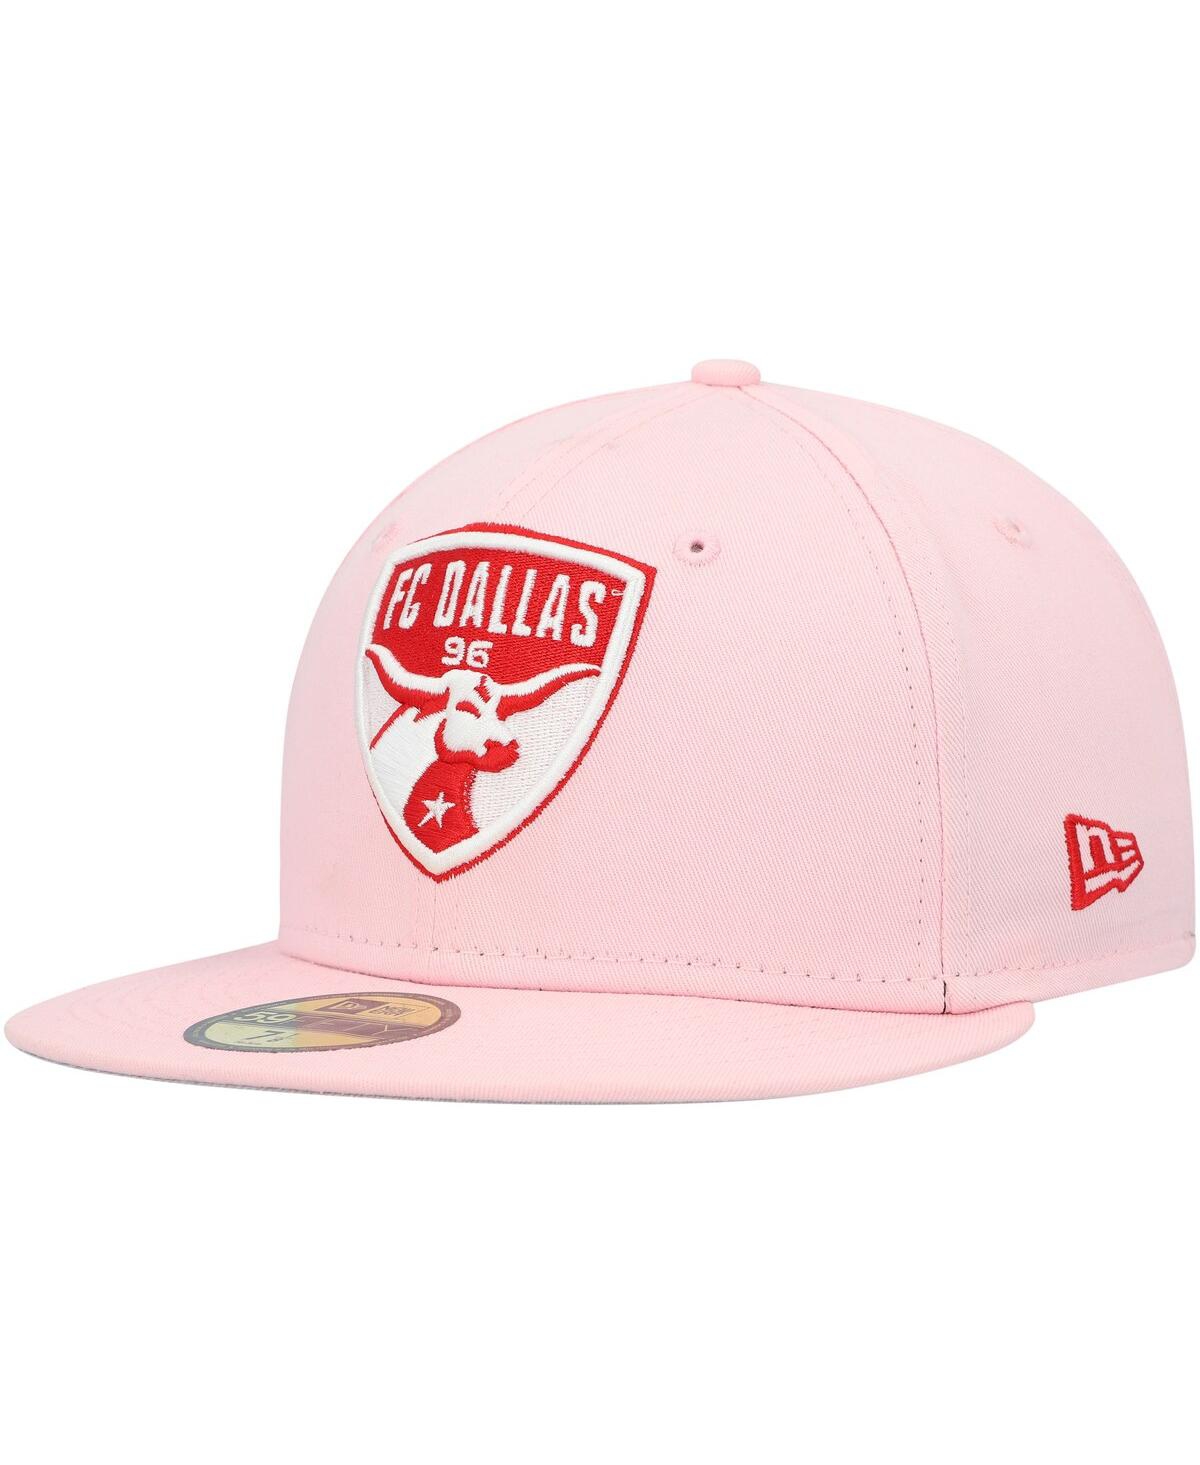 NEW ERA MEN'S NEW ERA PINK FC DALLAS PASTEL PACK 59FIFTY FITTED HAT